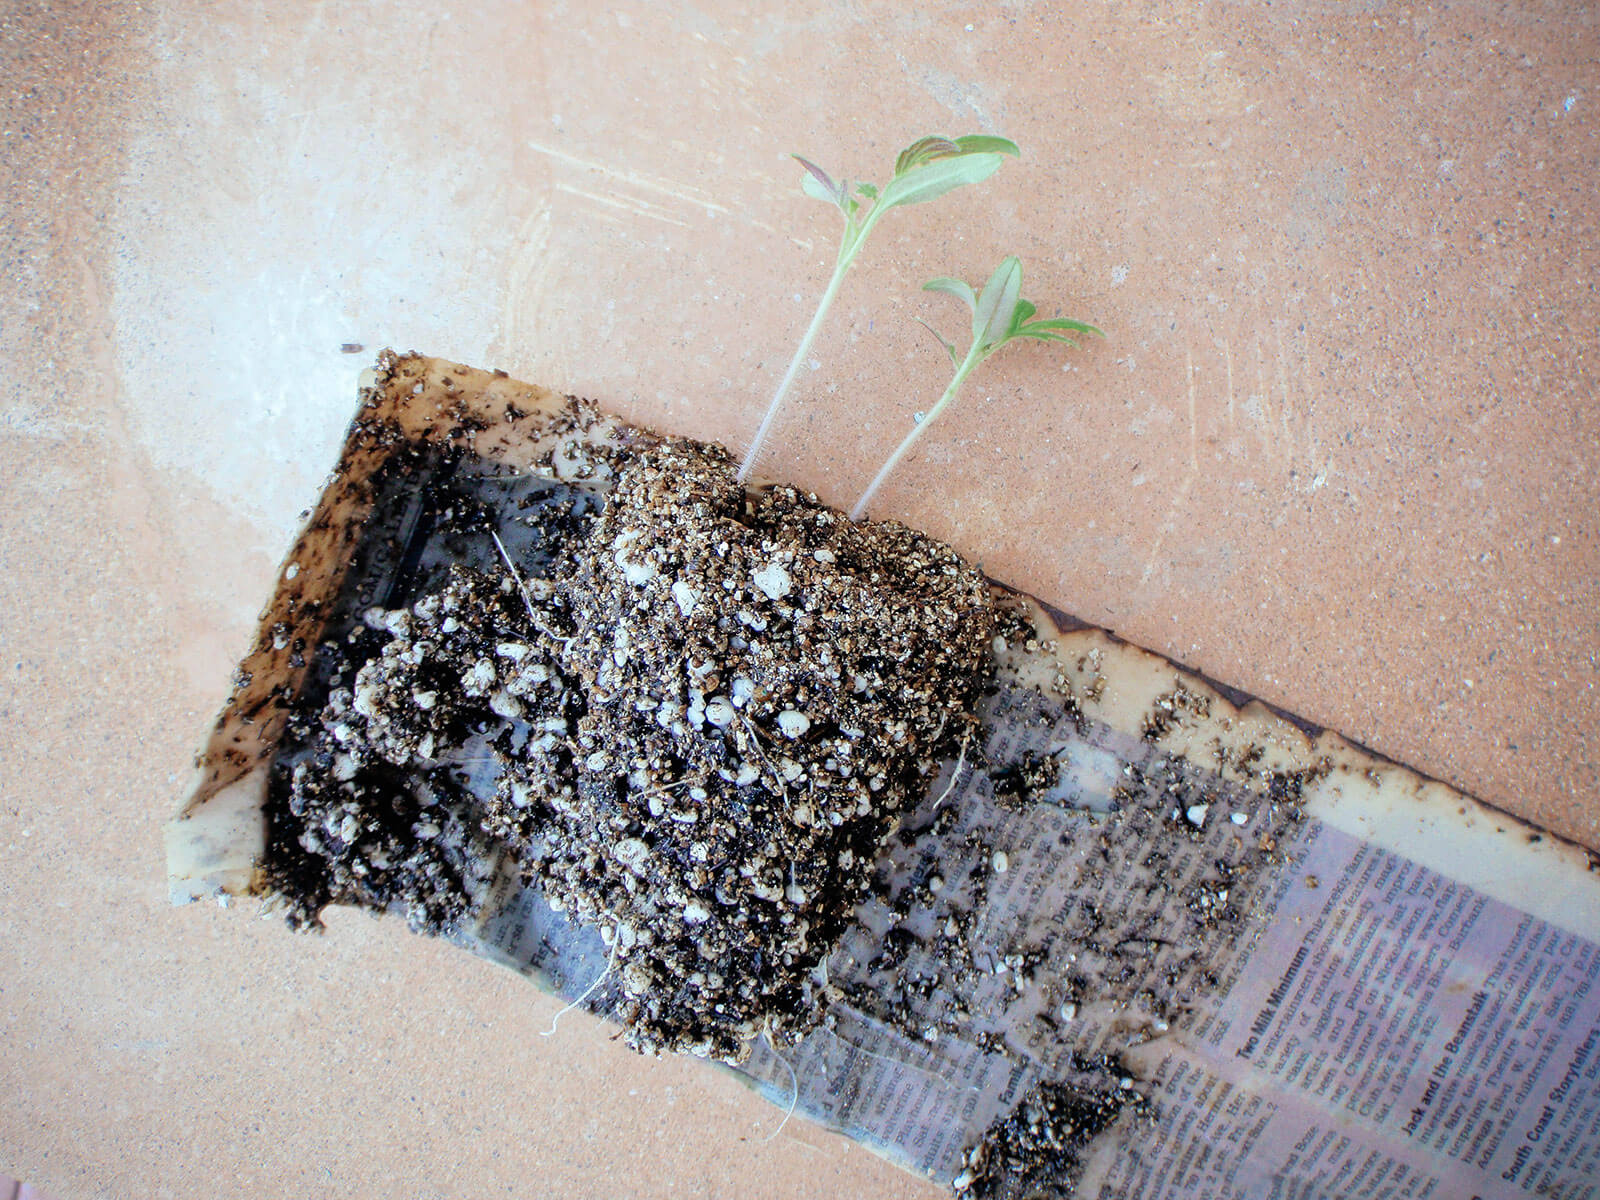 Remove the tomato seedlings from the seed starting pot